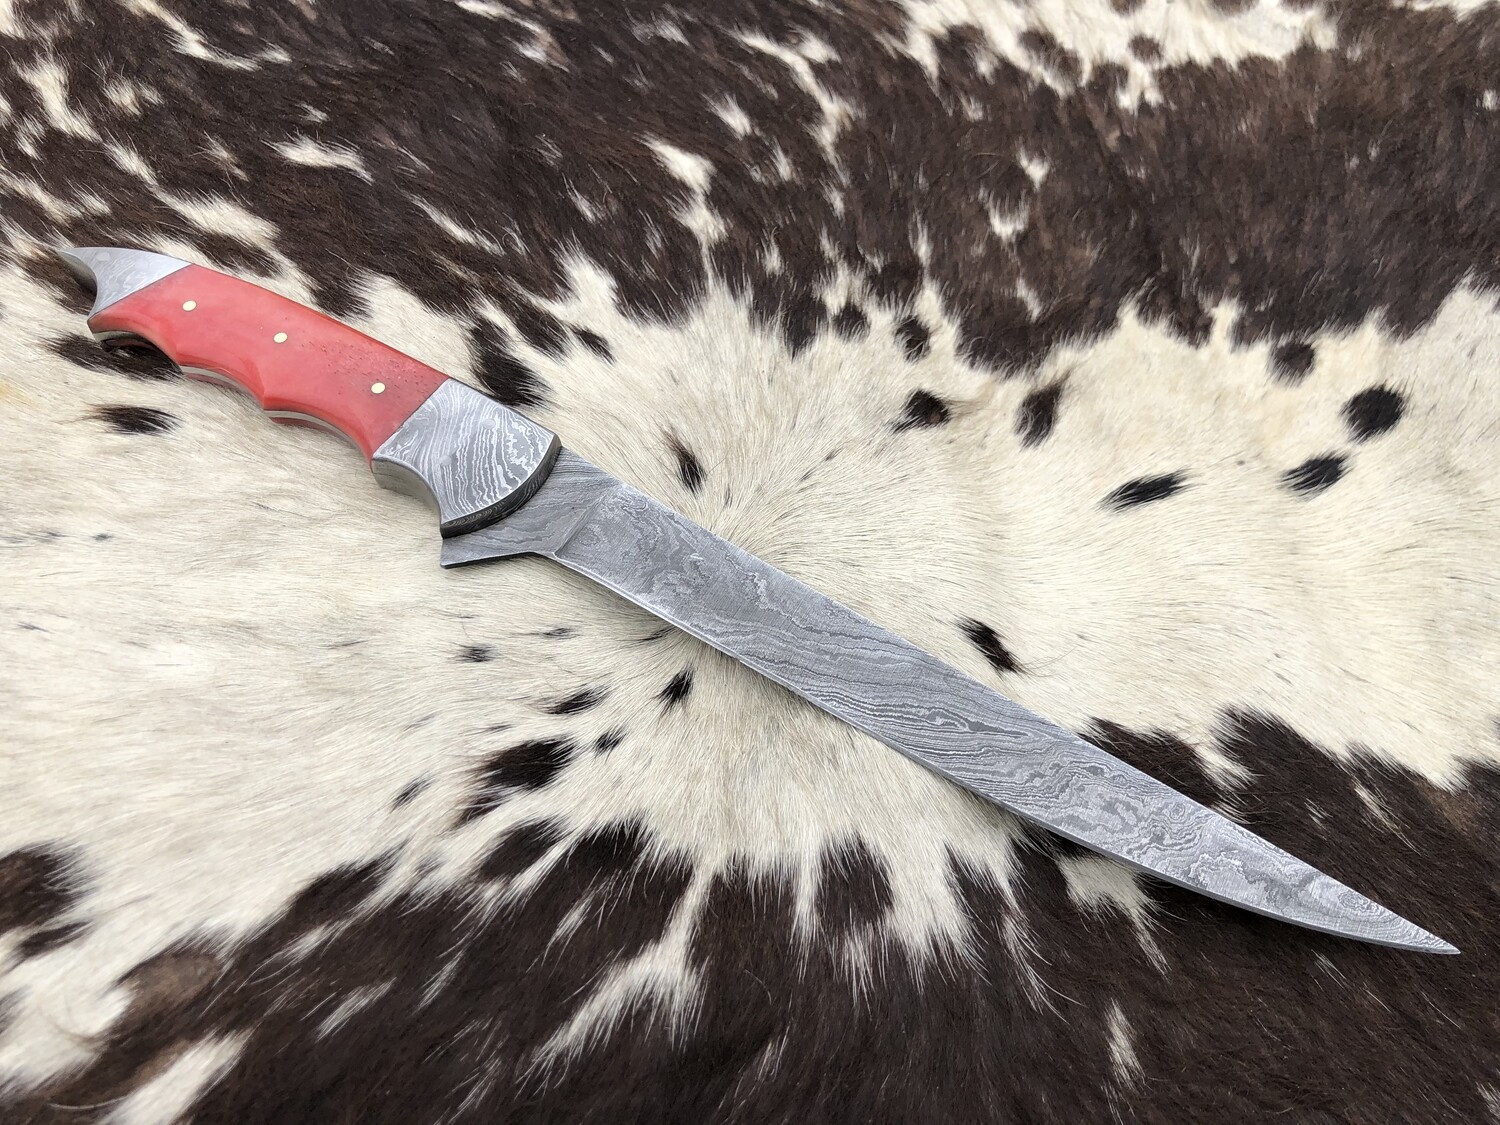 Damascus Fillet Knife With Colored Bone Handle